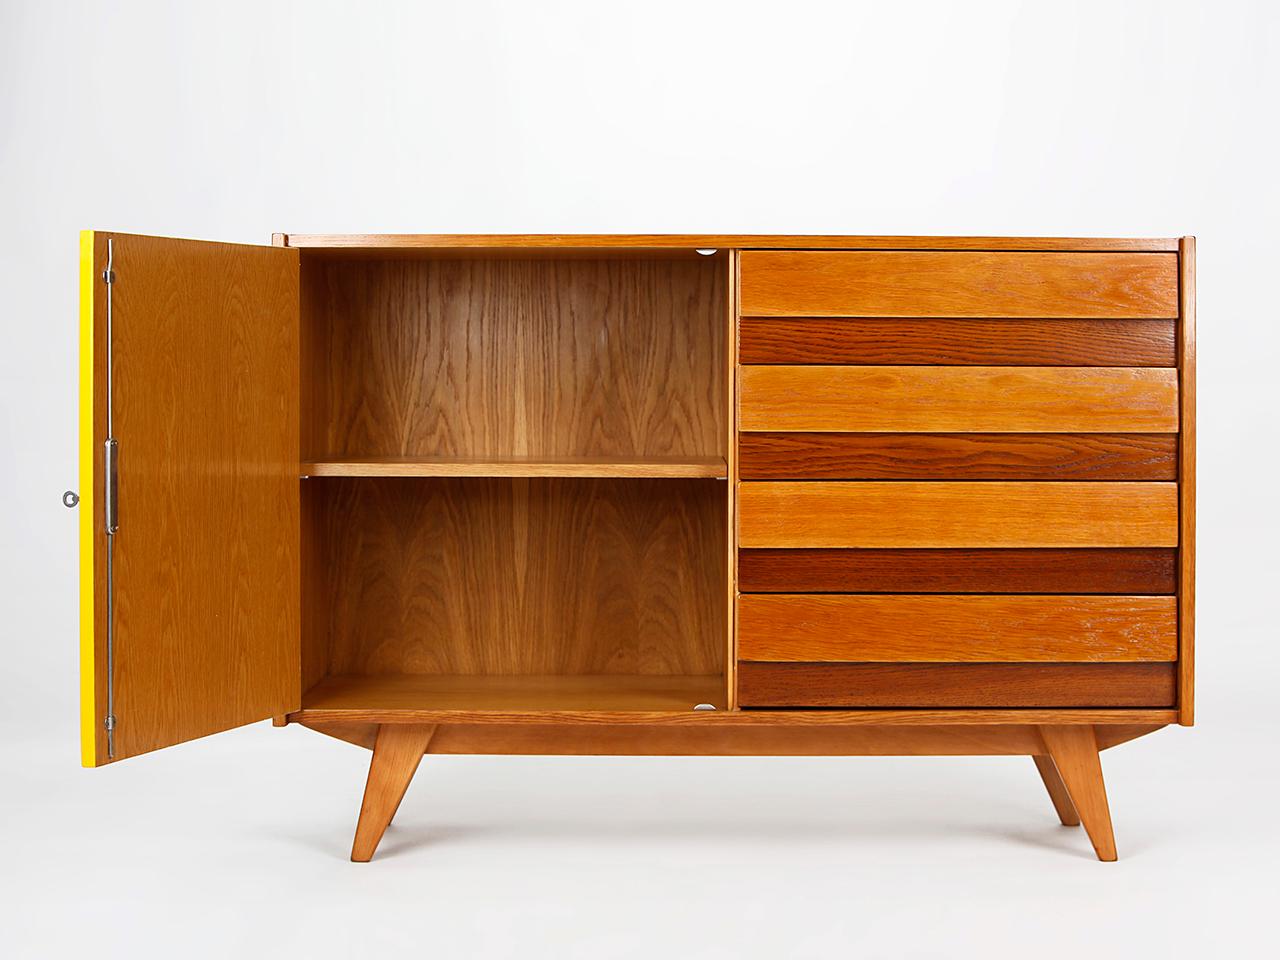 Midcentury sideboard U 458 by Jiri Jiroutek for Interier Praha, dating from the 1960s, with four drawers and yellow doors, from the former Czechoslovakia. Completely restored and repainted. Delivery time 3-4 weeks.